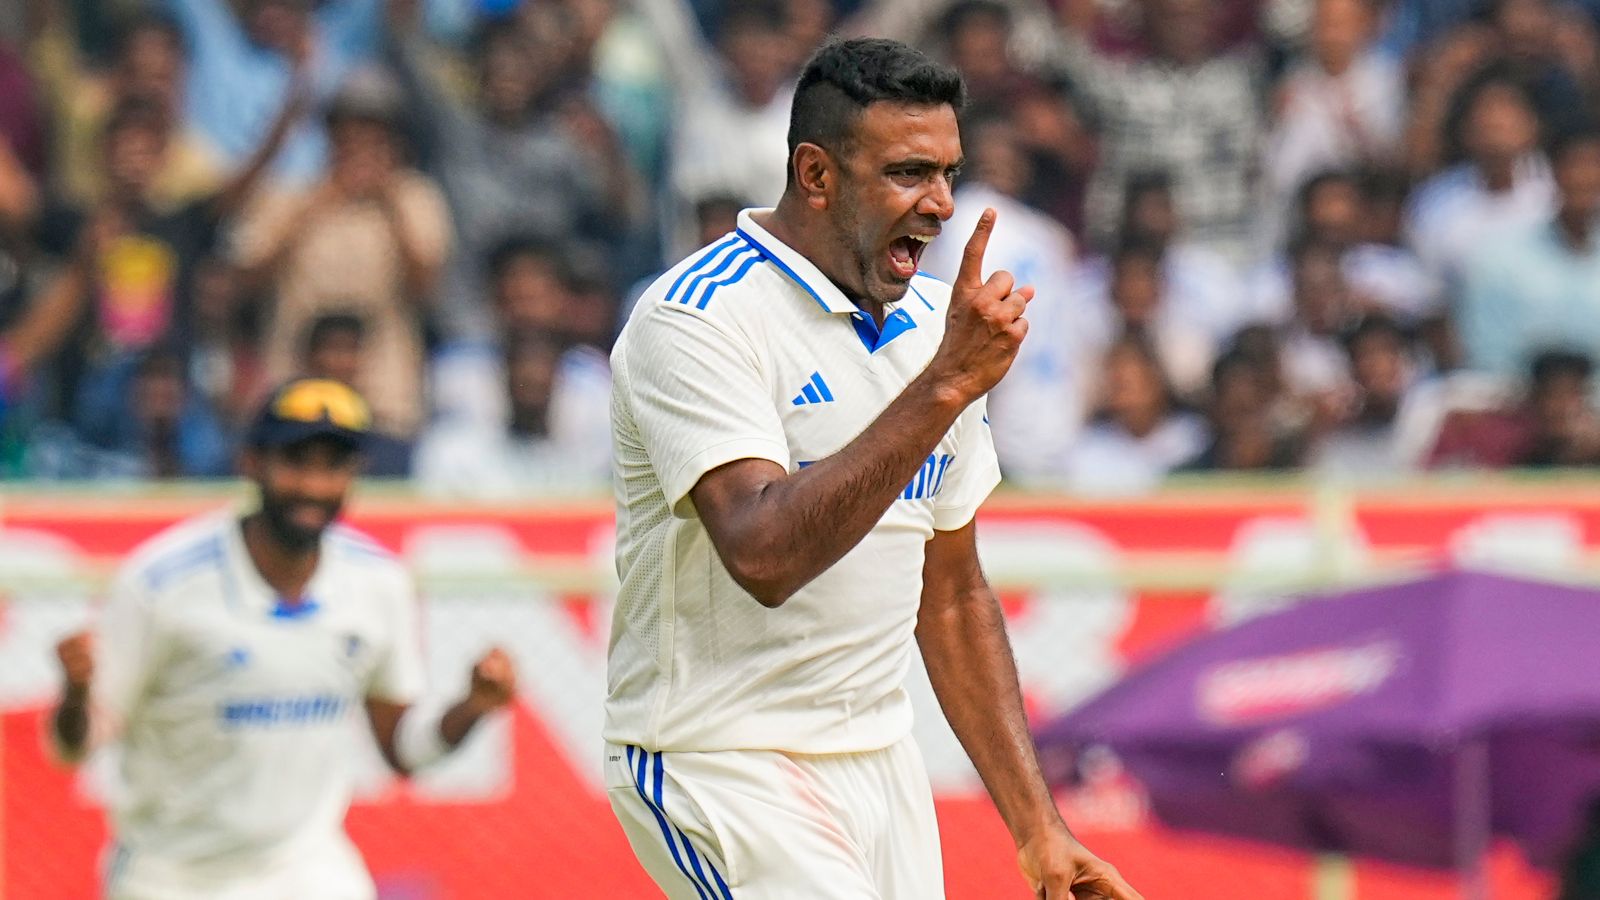 IND vs ENG: R Ashwin Returns To Field Without ‘Penalty Time’